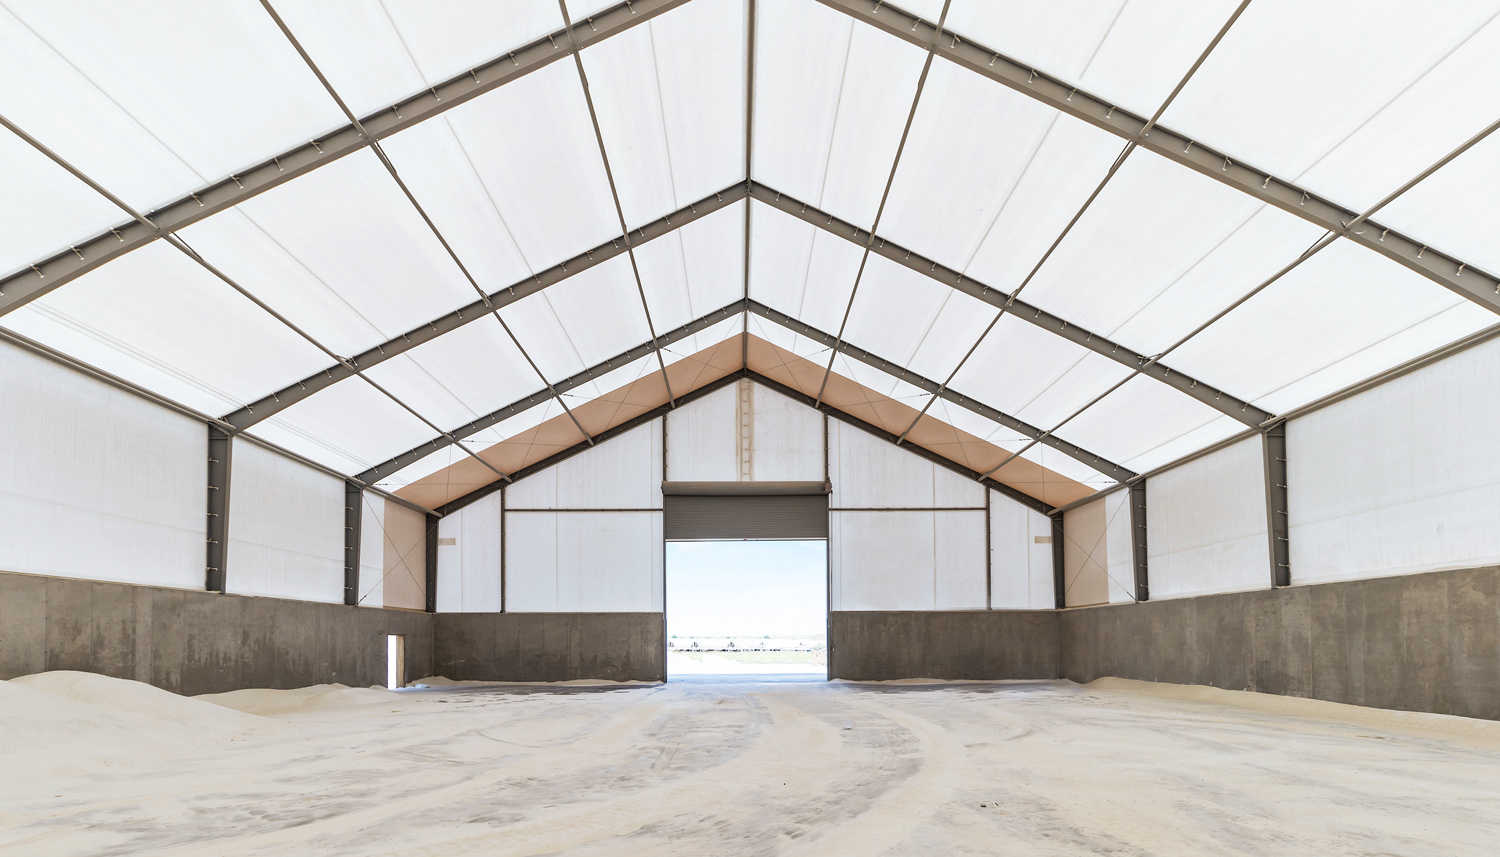 Tension fabric structure vs. monocover fabric buildings